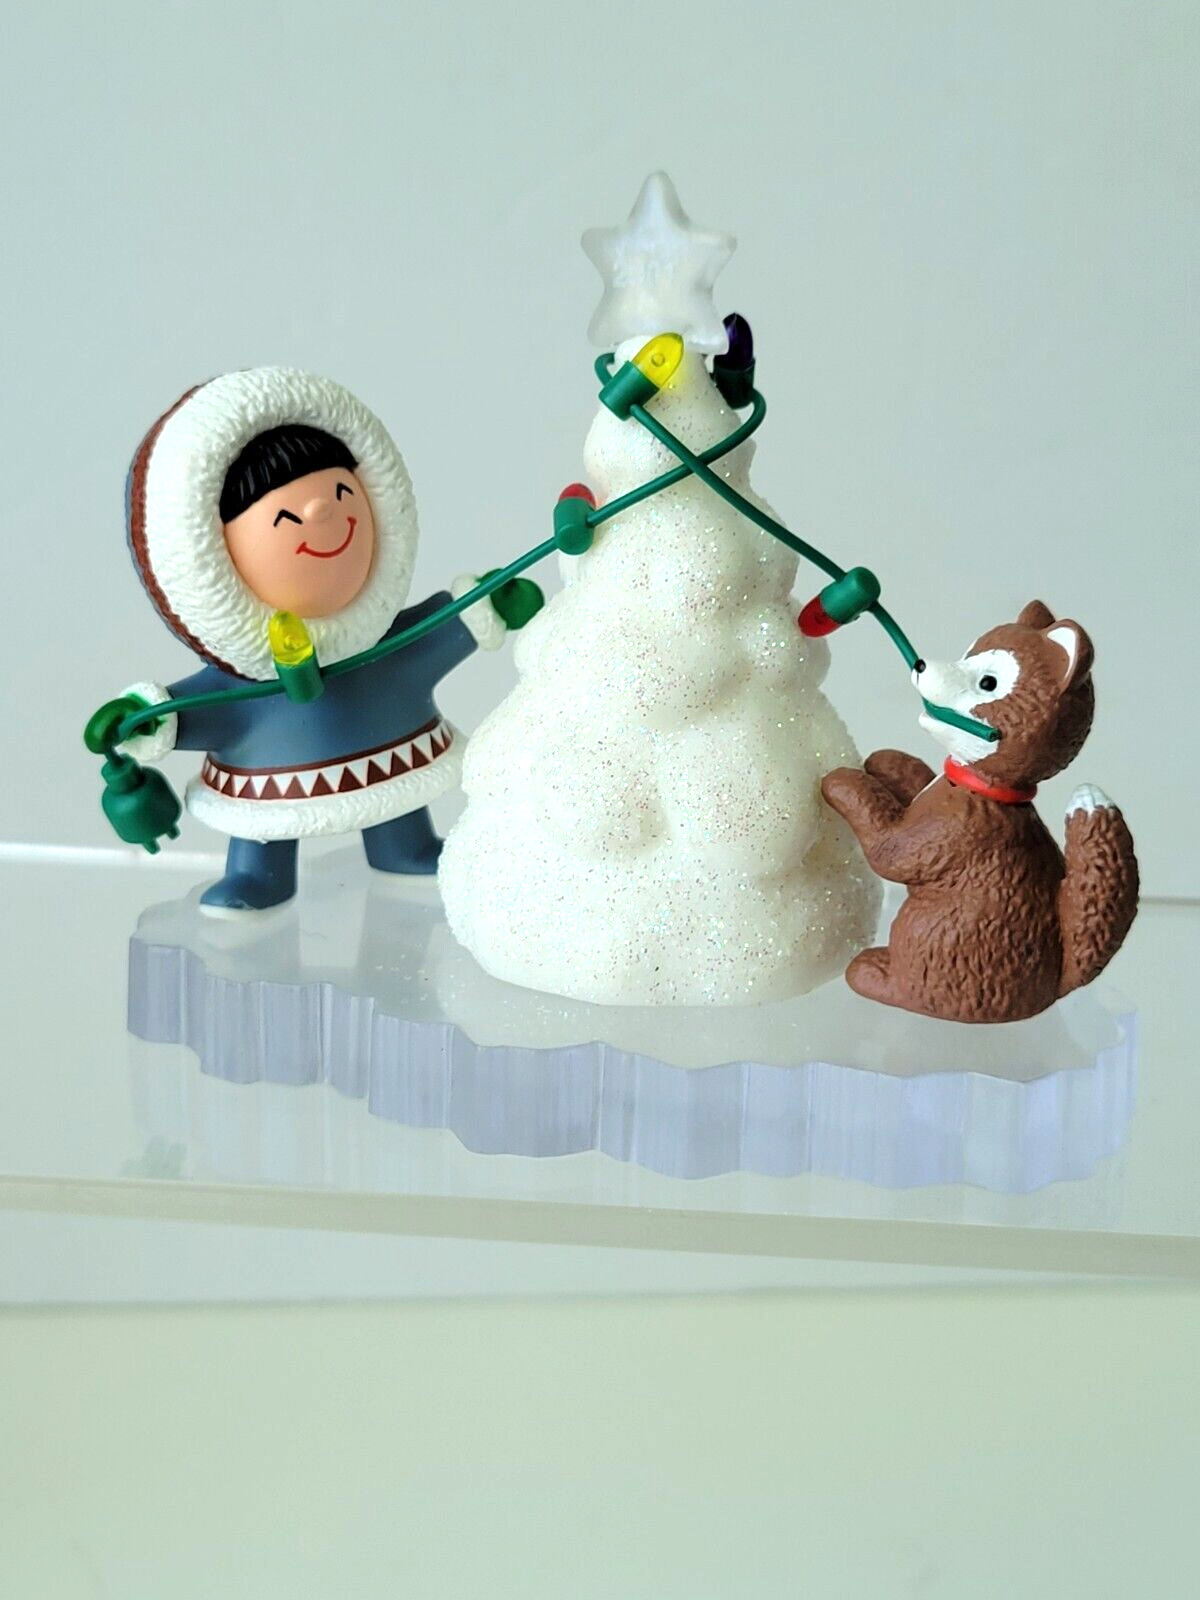 Hallmark  Frosty  Friends Ornament 2001 Snow Tree Decorating Party#22 in series